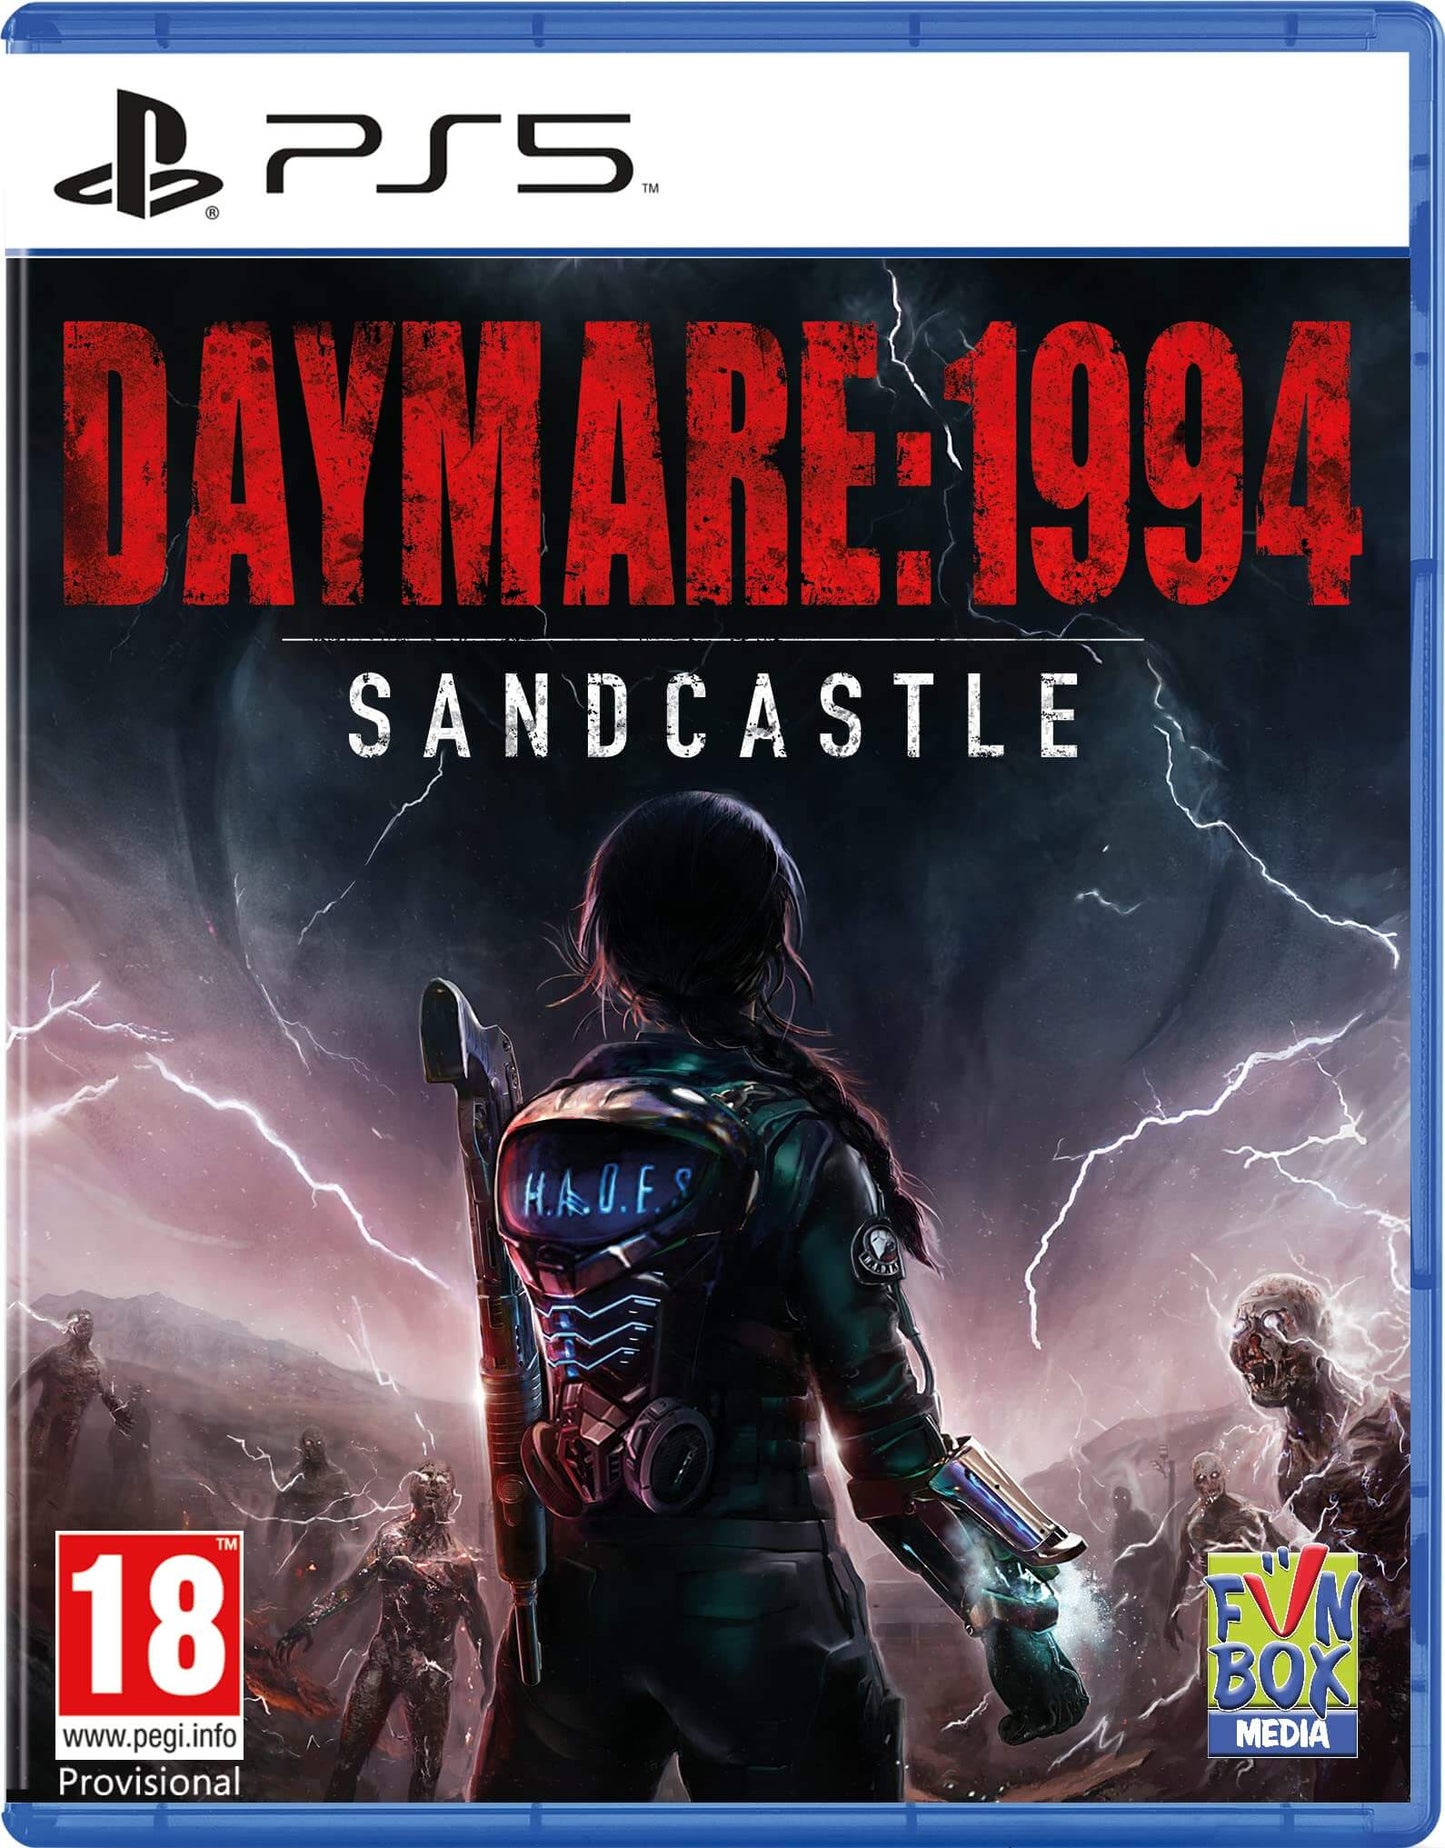 Daymare: 1994 Sandcastle PS5 £19.99